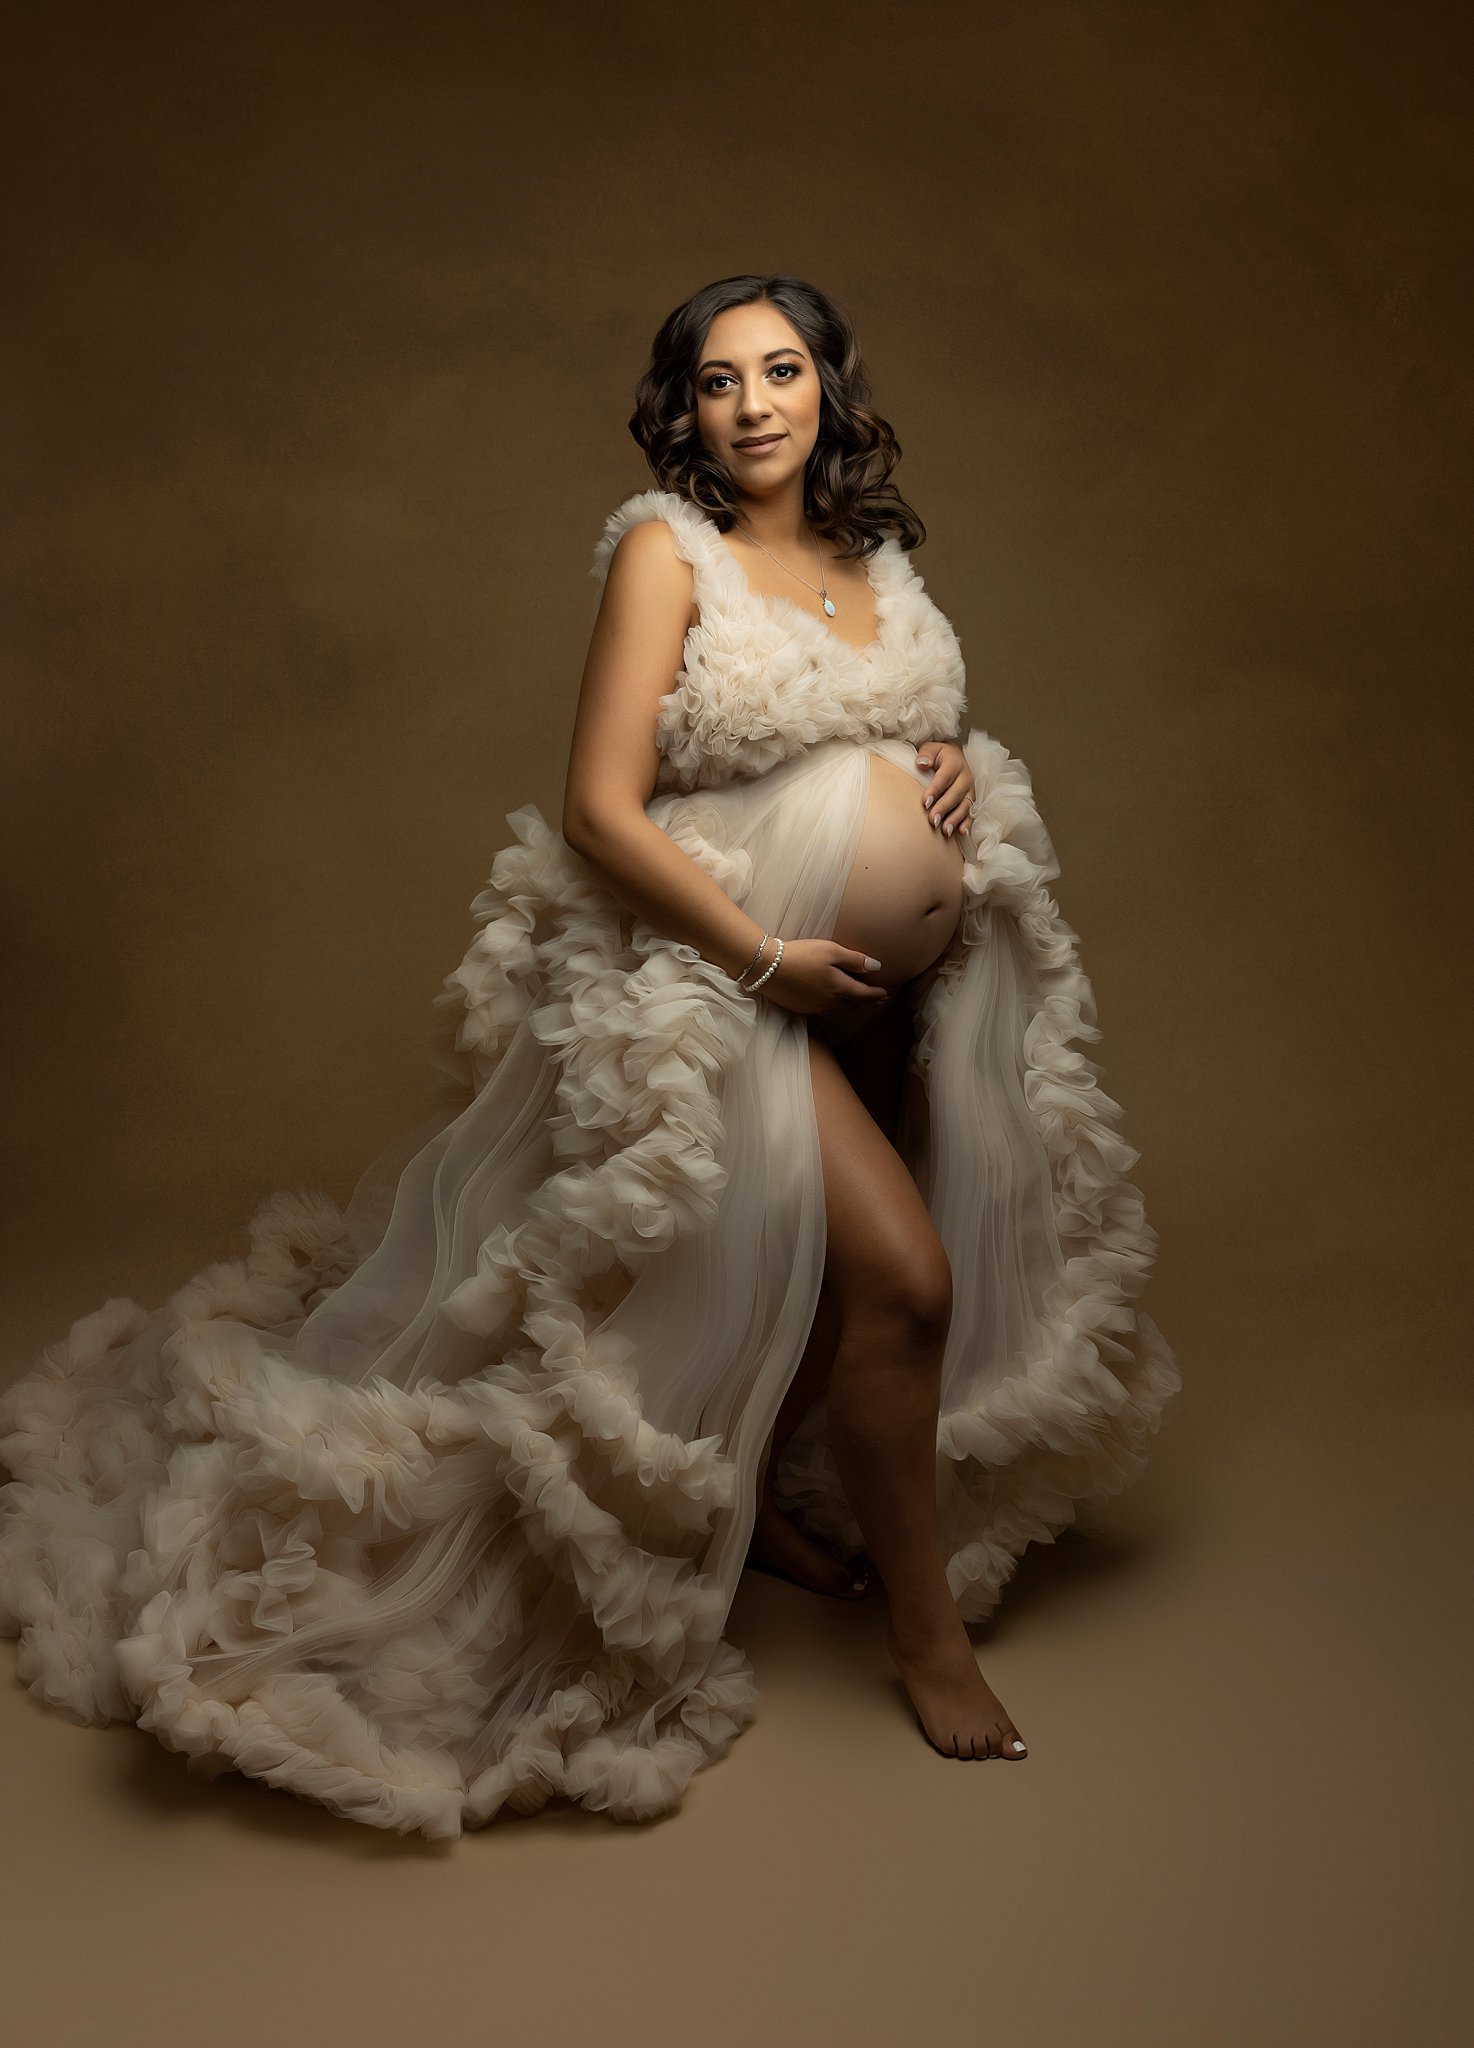 Mother to be stands in a studio wearing a white maternity gown while holding her bump